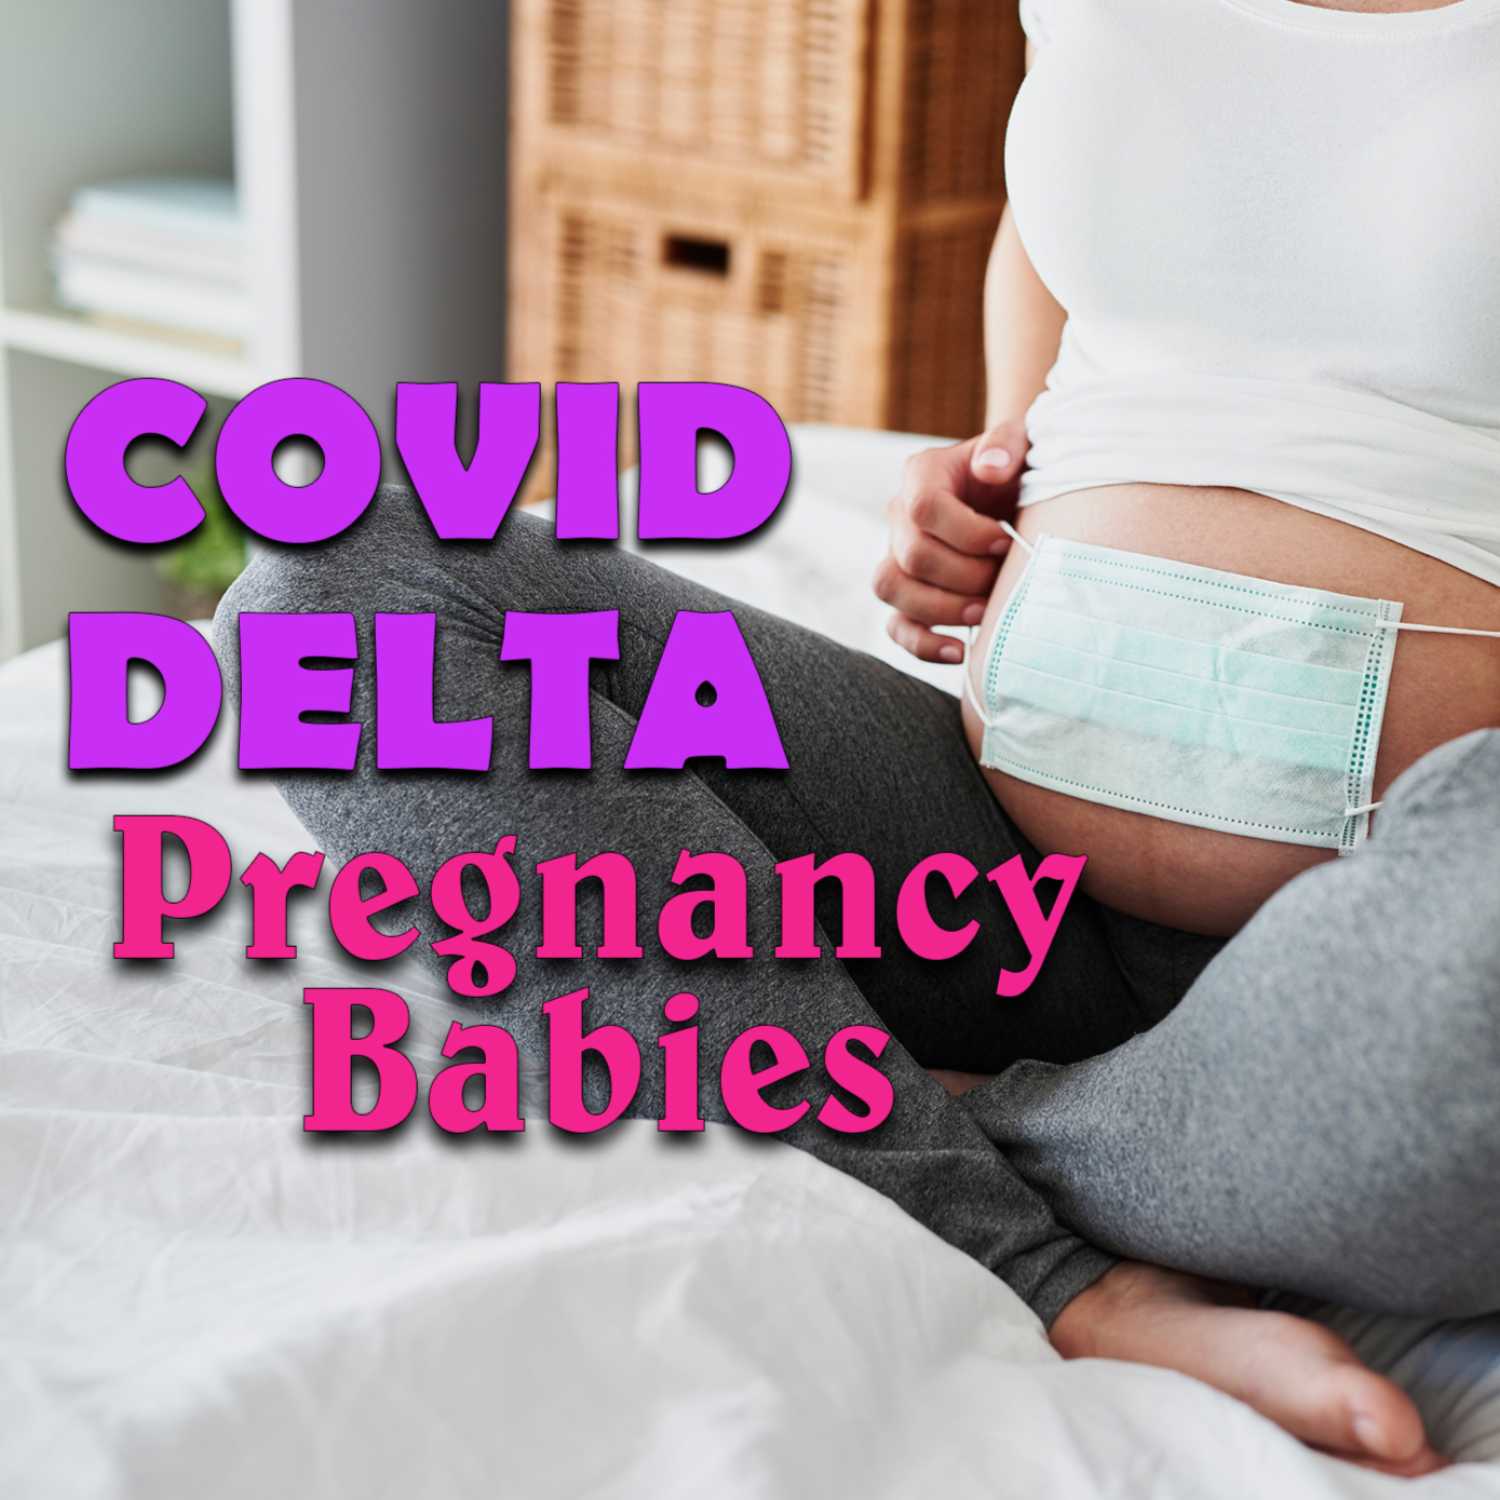 The Delta Variant And COVID: What Parents Need To Know